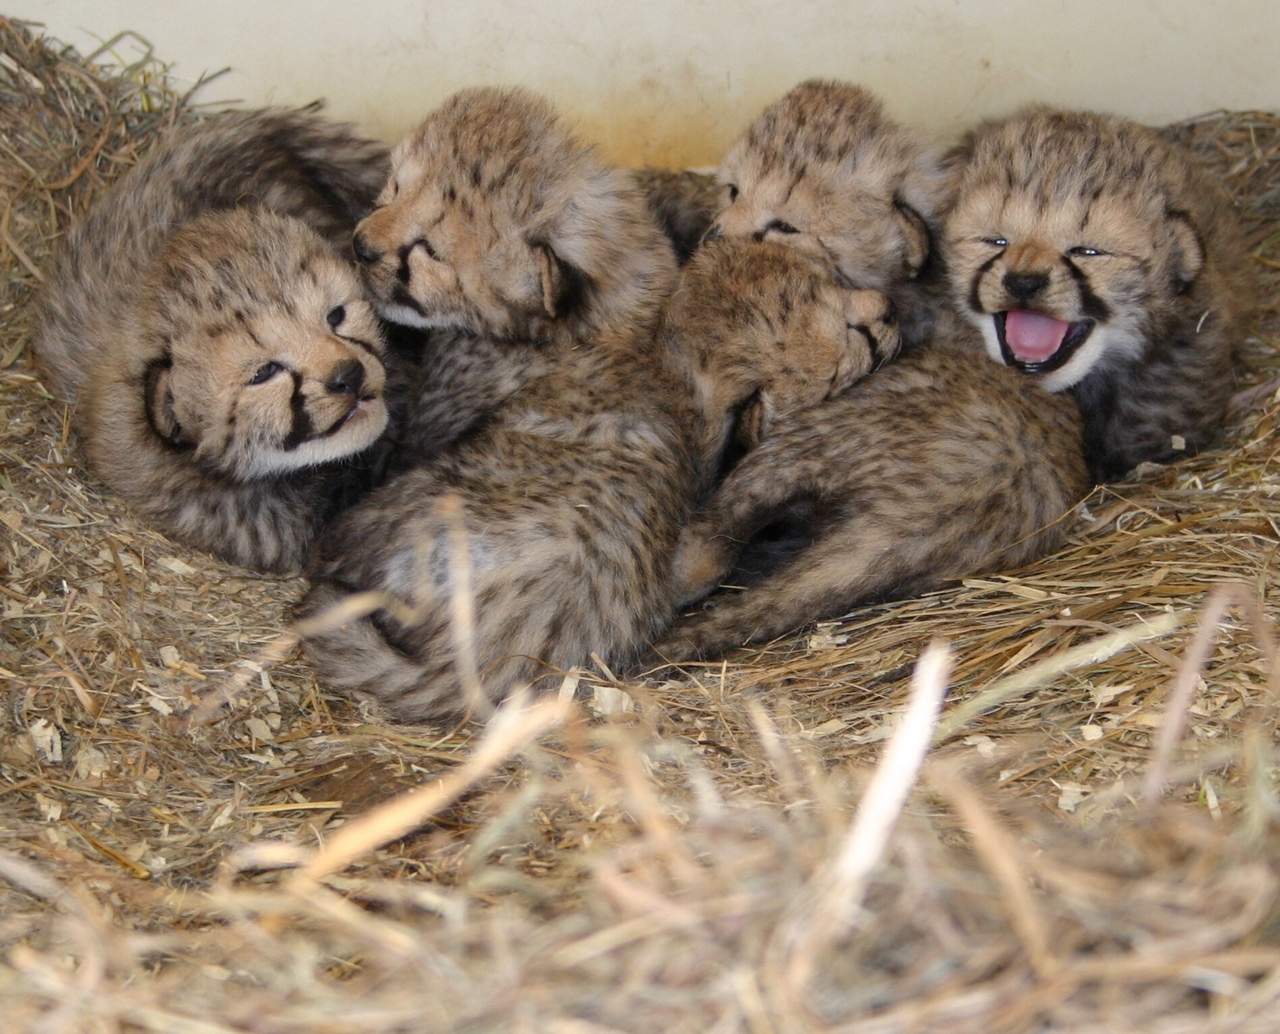 Cute cheetah alert! We have a new “pile of cubs” (our favorite kind), as our cheetah biologist put it.
Two large litters were born over the course of a week at the Smithsonian Conservation Biology Institute: 3-year-old Happy gave birth on March 23...